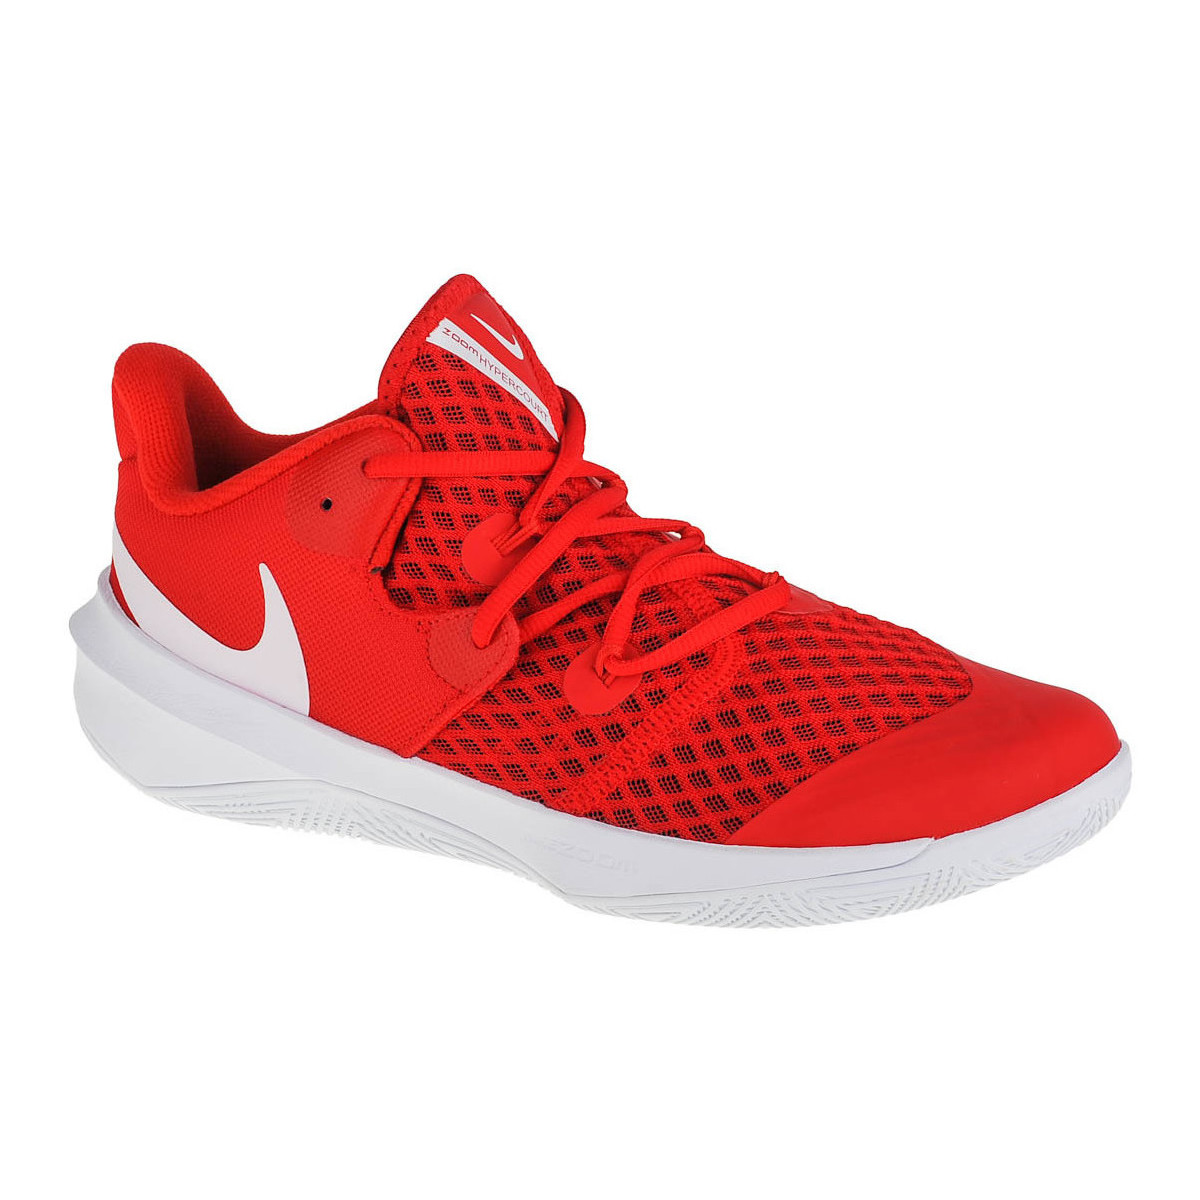 Scarpe Donna Fitness / Training Nike W Zoom Hyperspeed Court Rosso